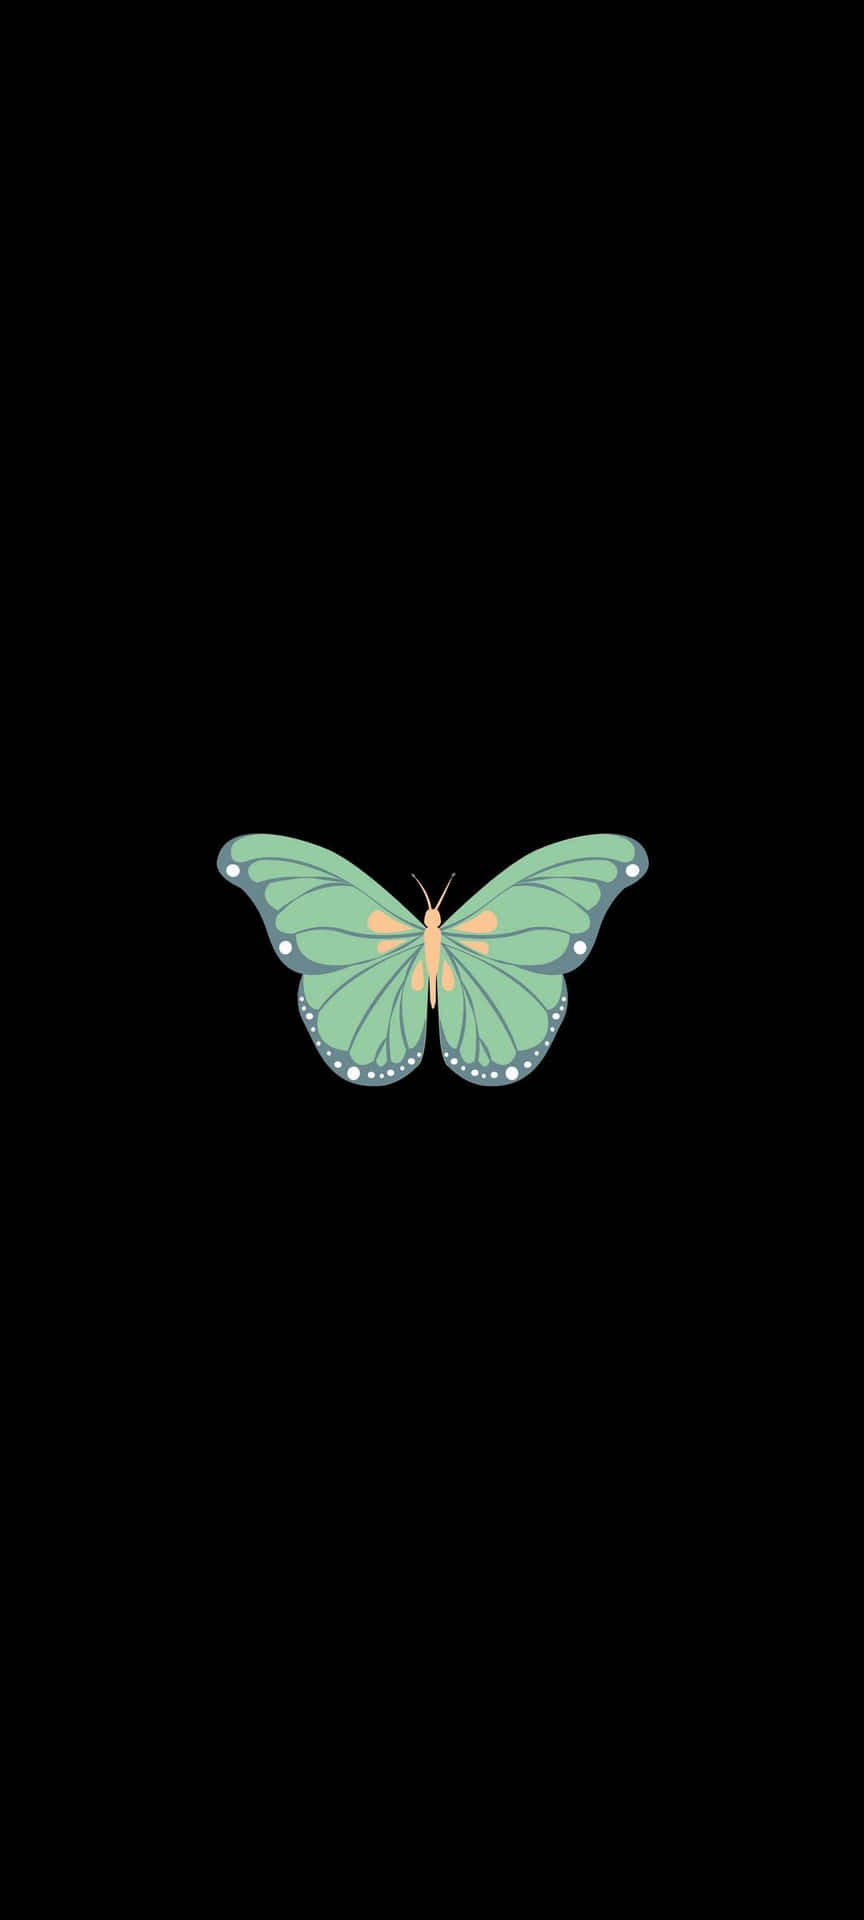 The beauty of nature - a delicate green butterfly Wallpaper